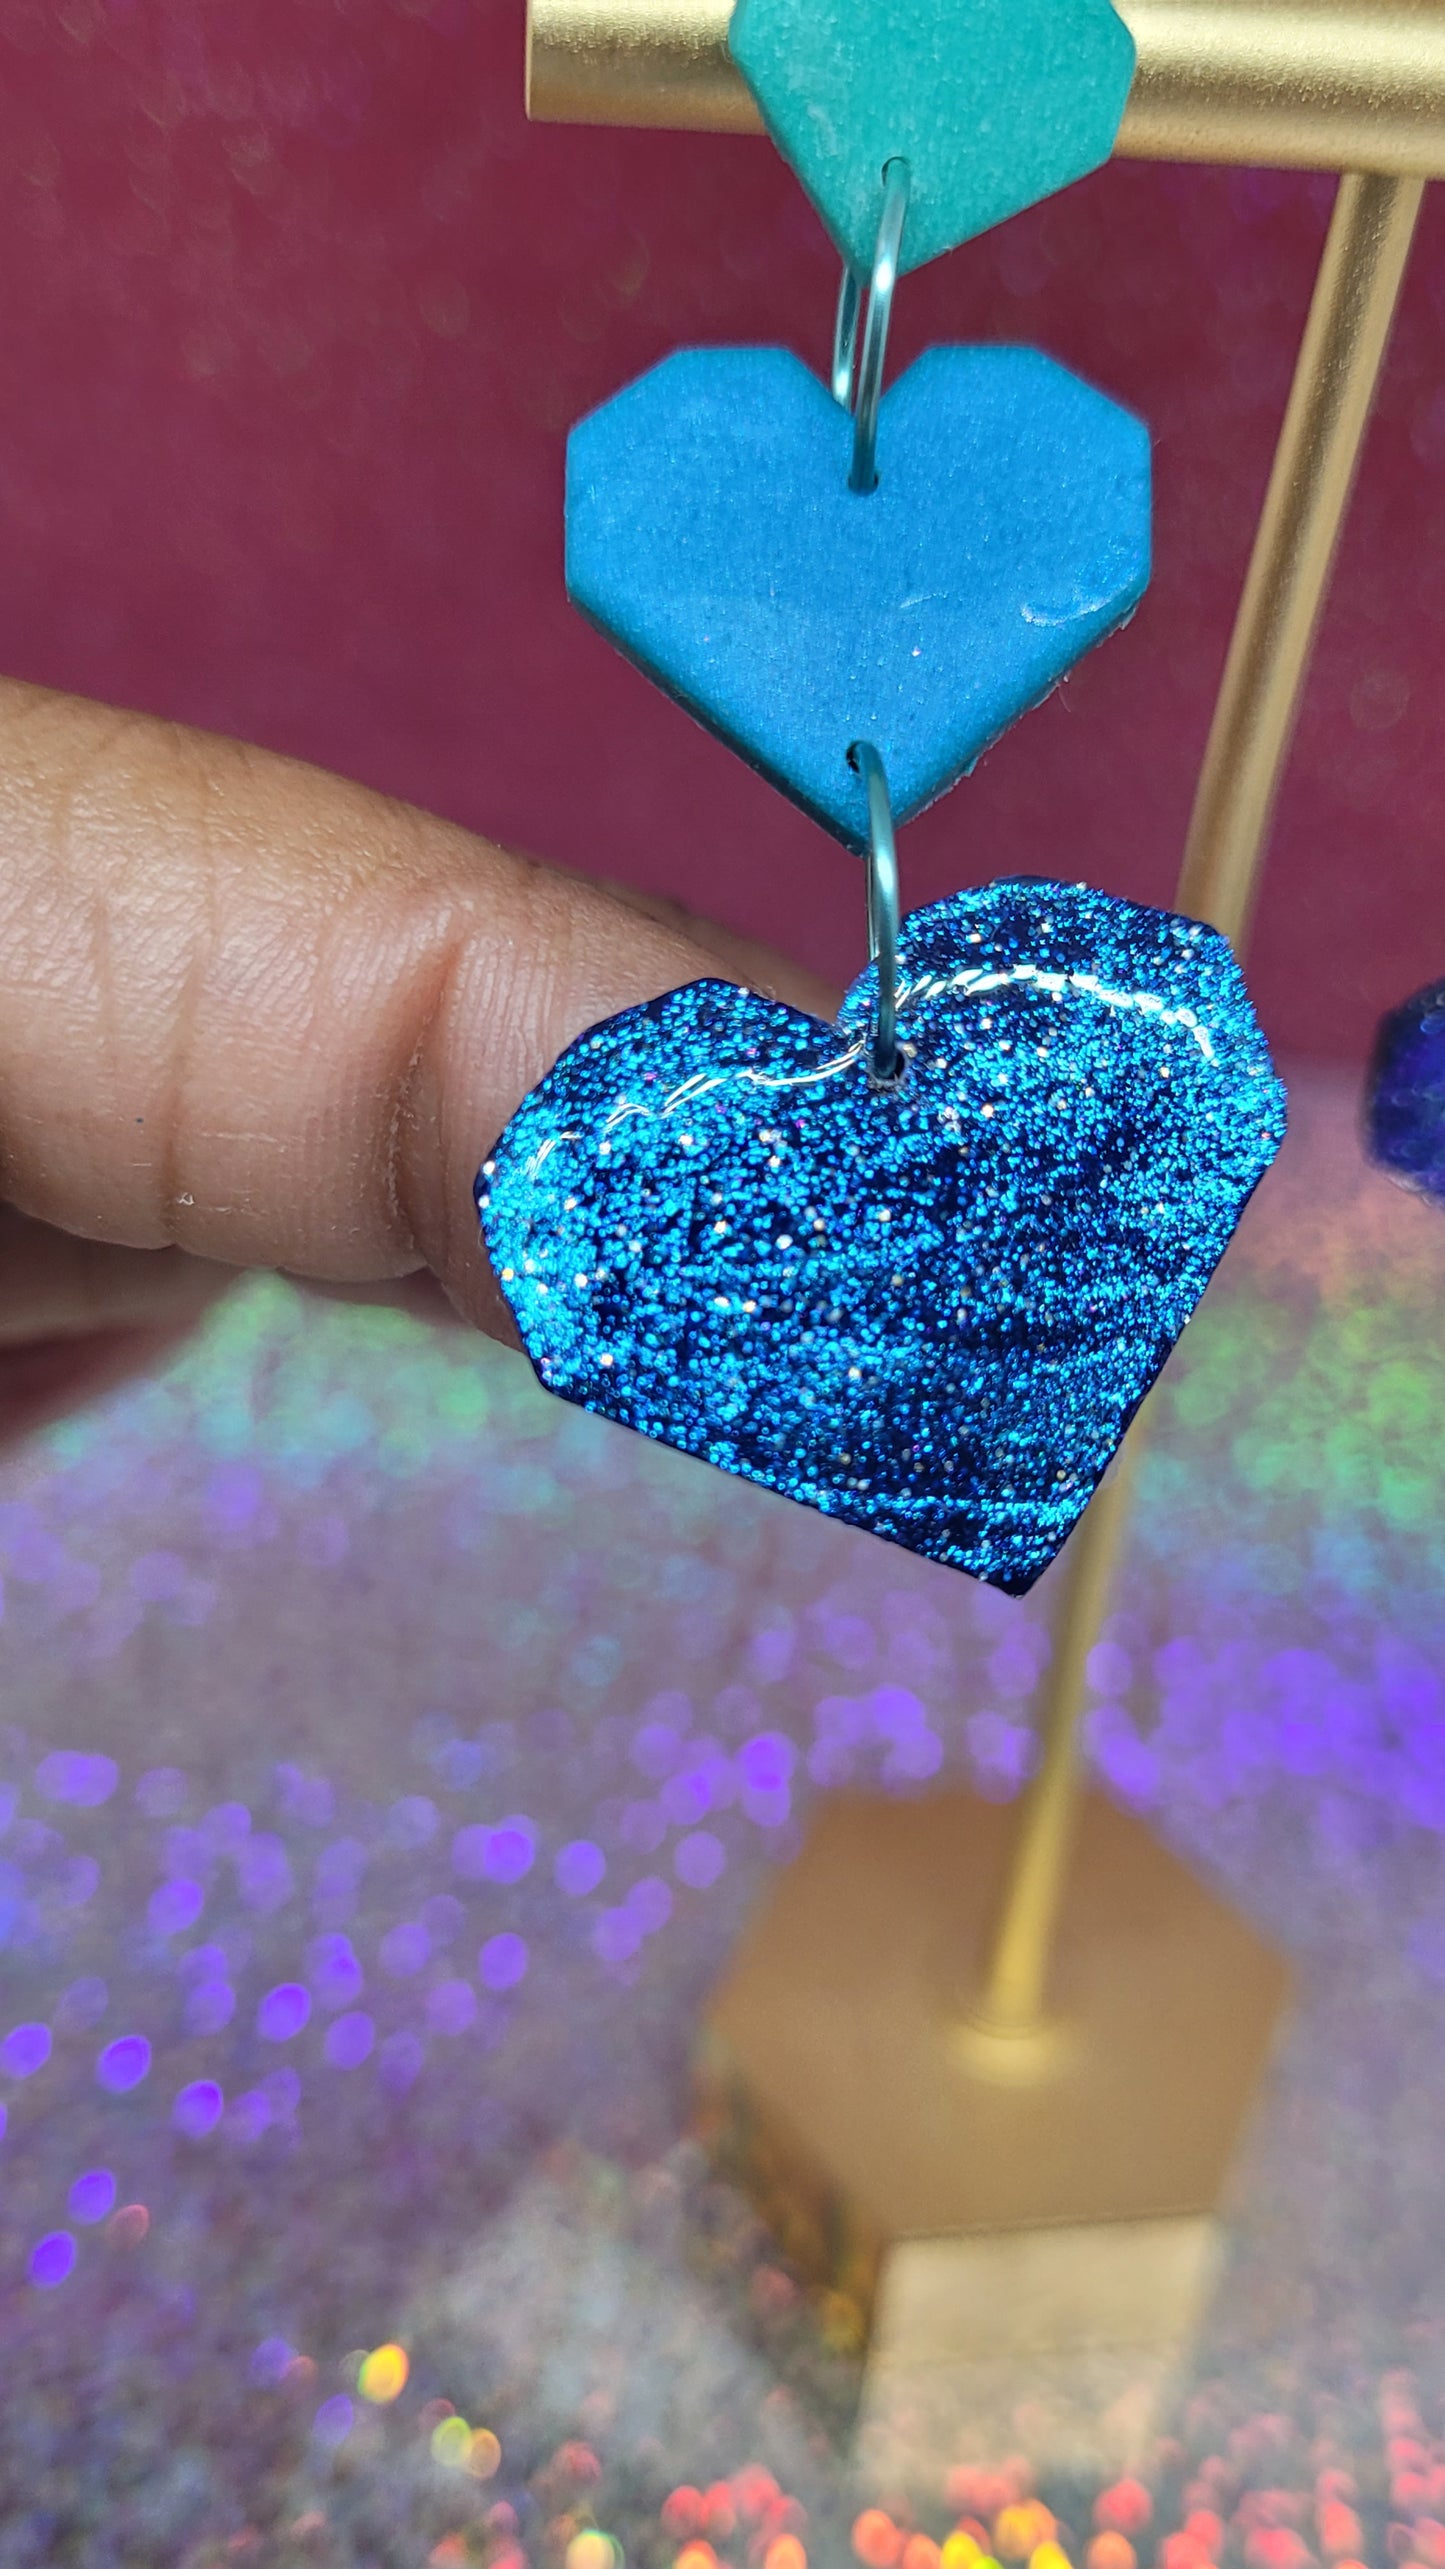 Closeup of lower heart with glitter detail